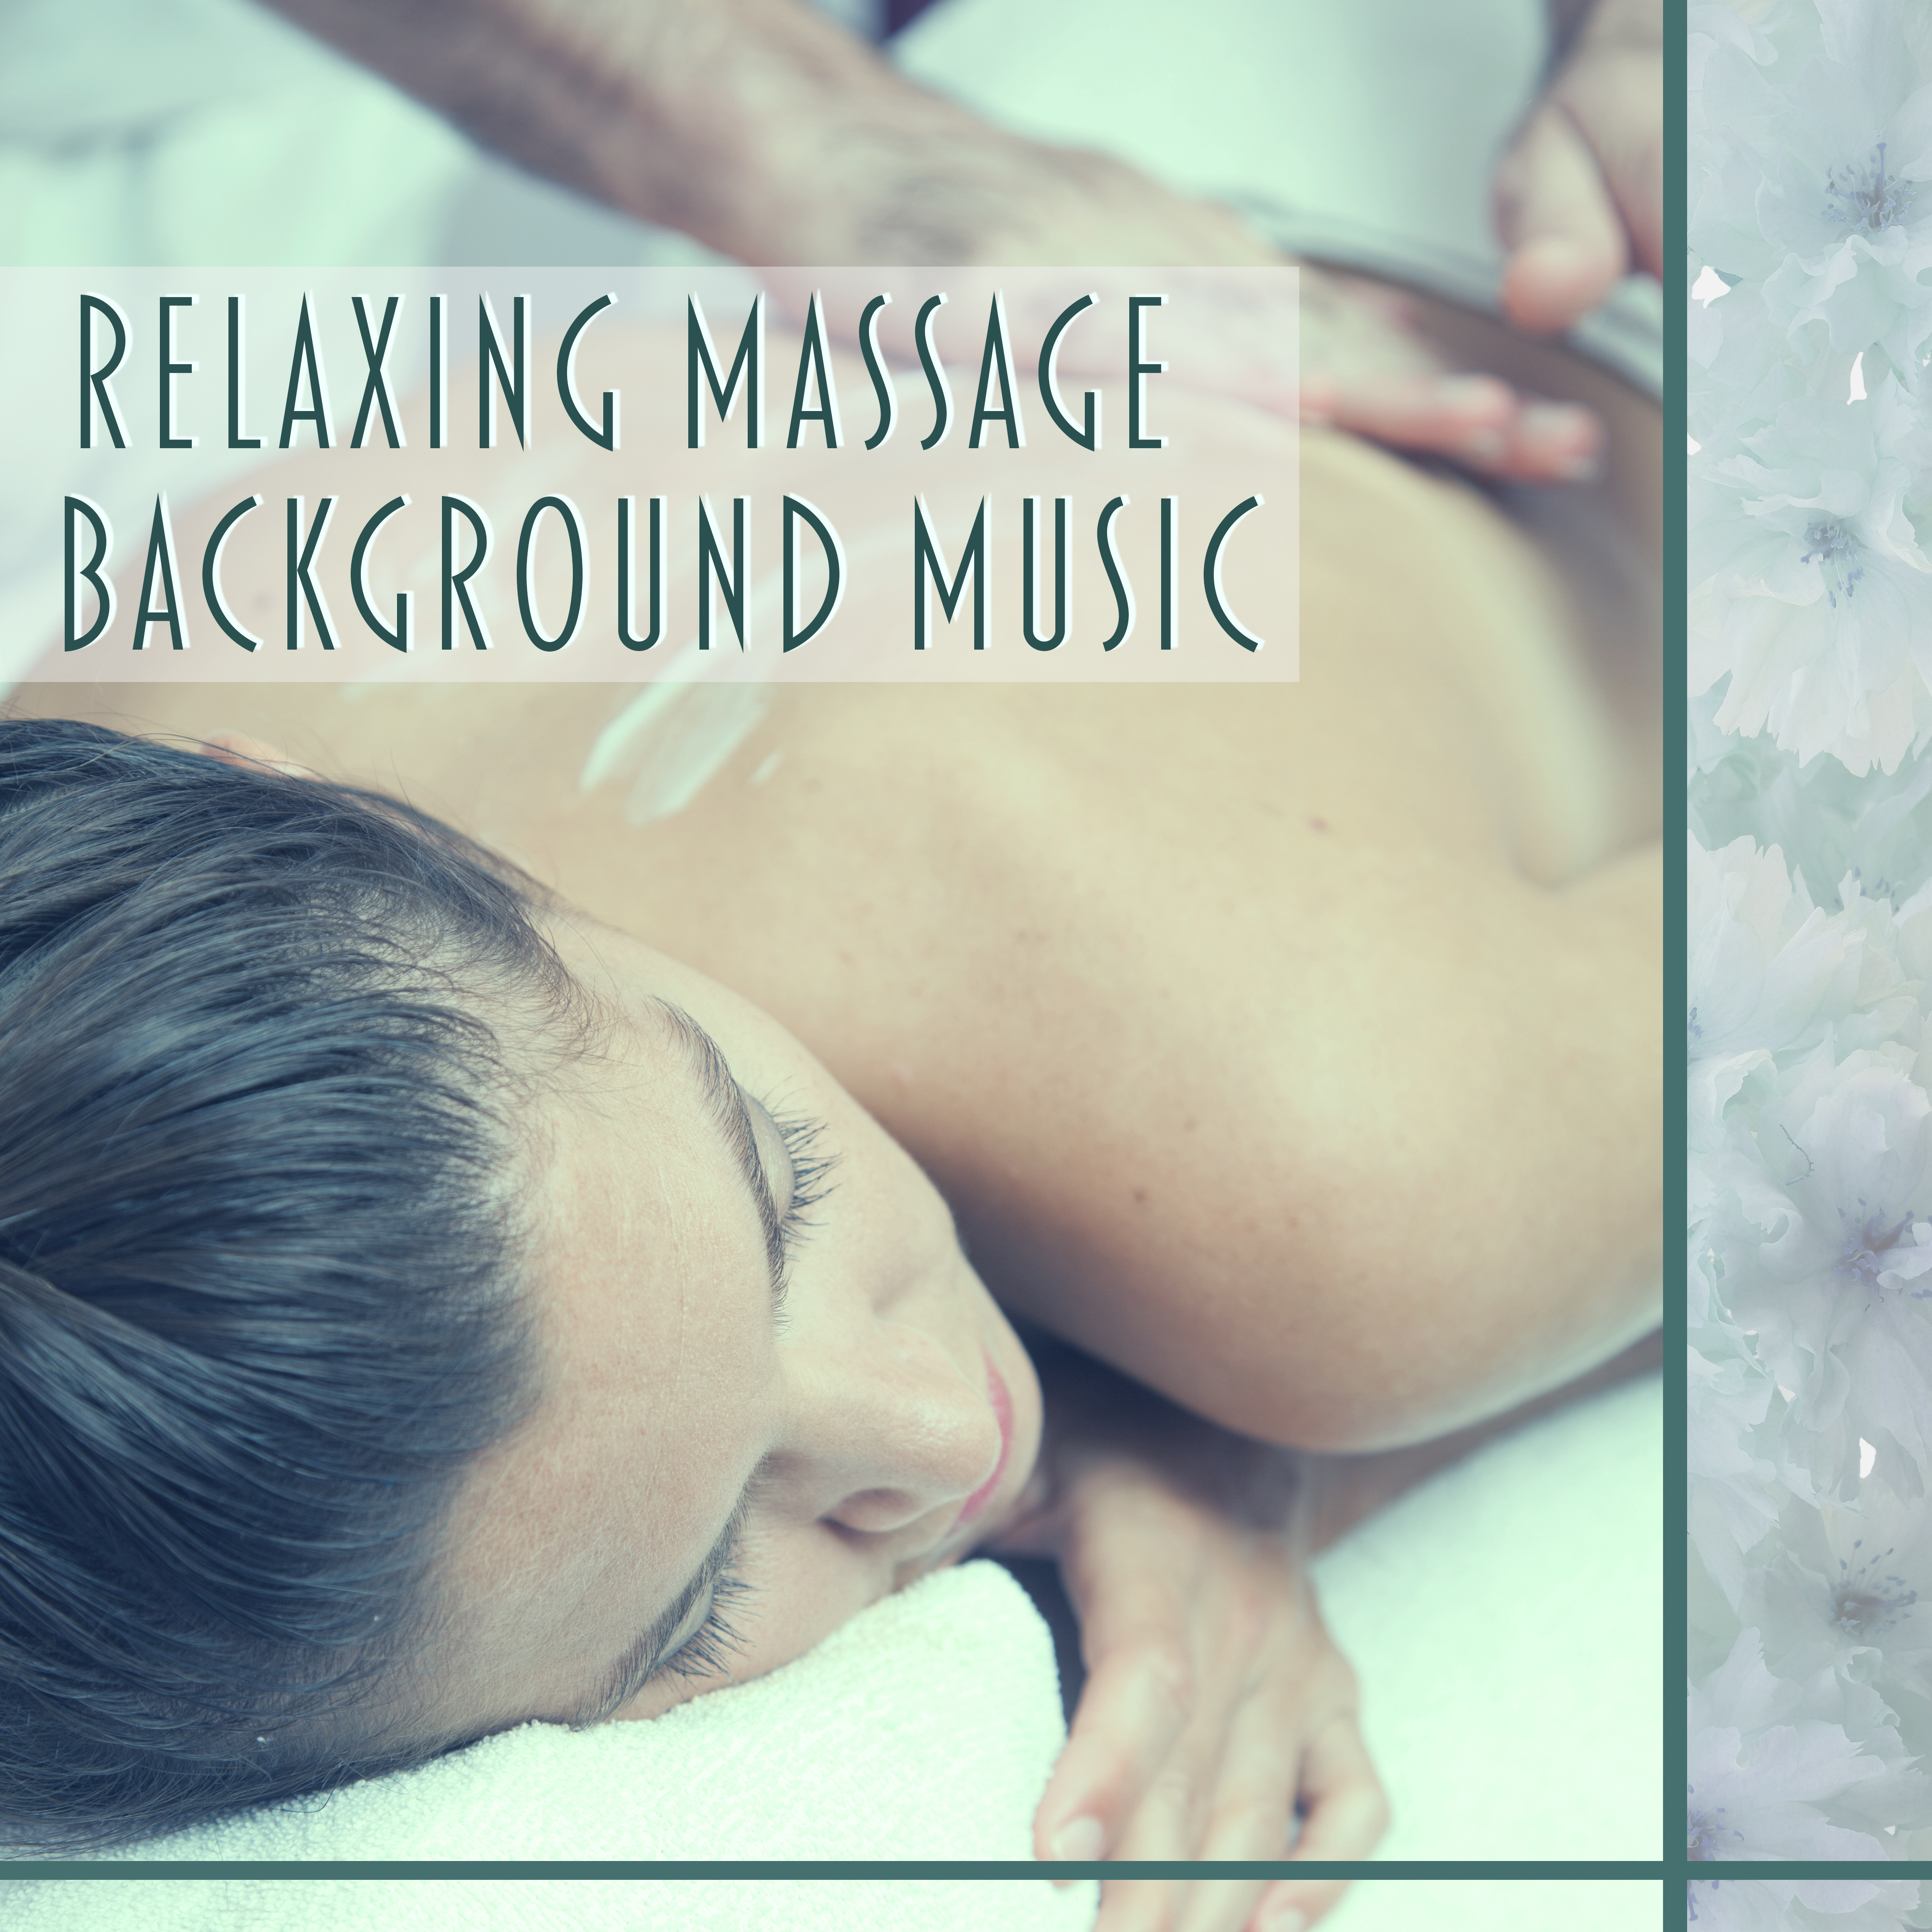 Relaxing Massage Background Music  Soft Sounds of Nature for Relaxation, Spa, Wellness Parlour, Relaxing Music